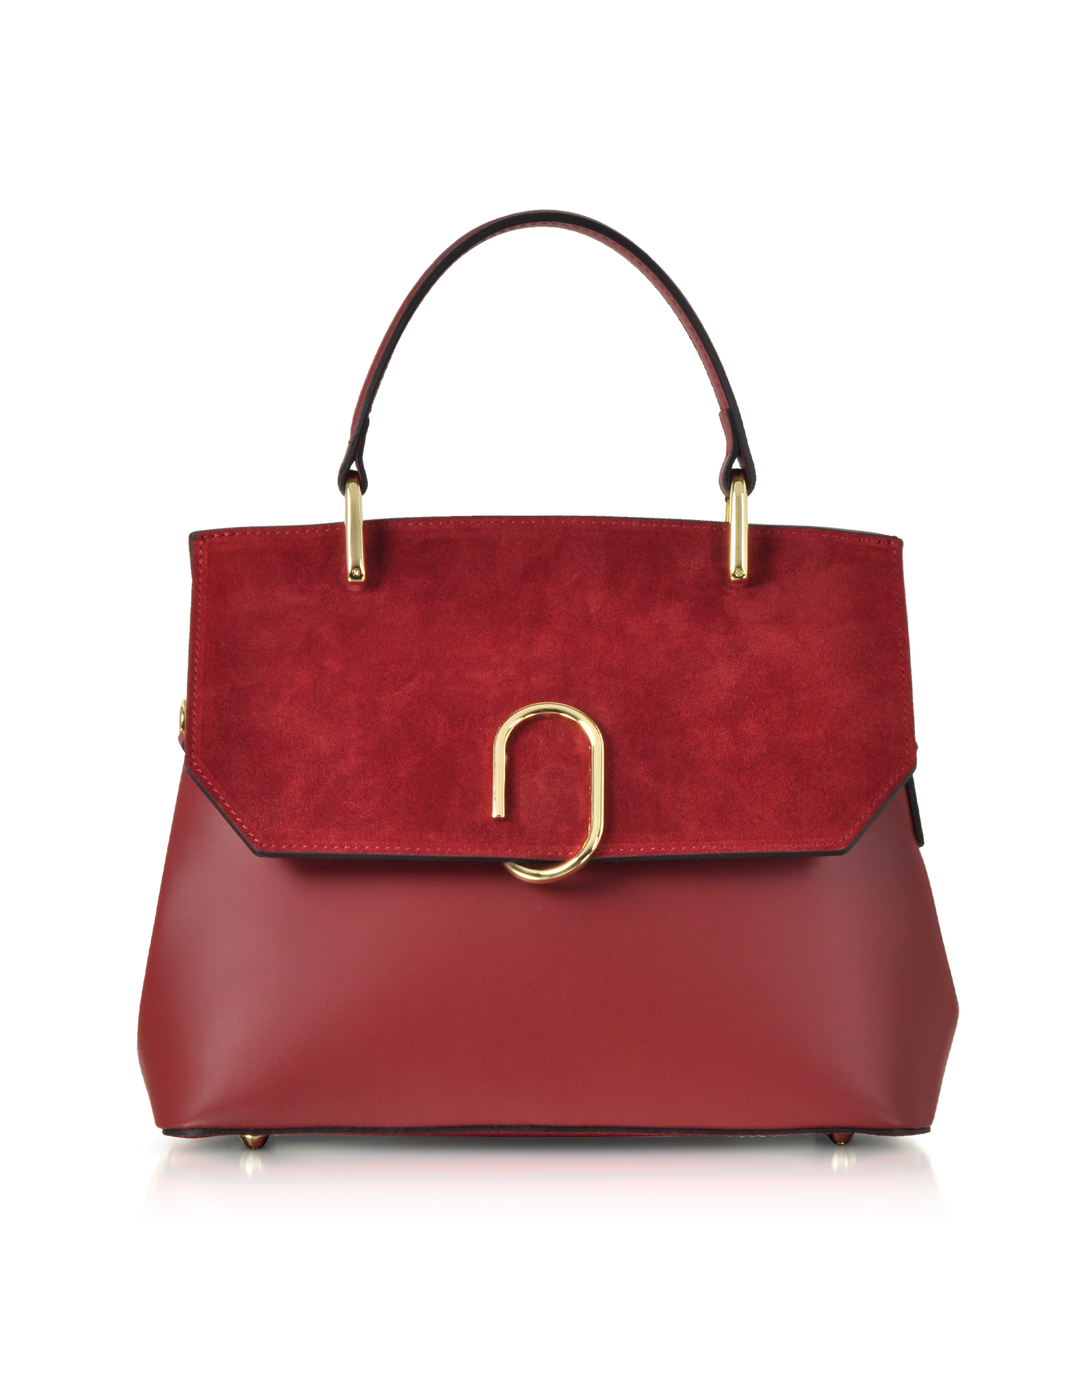 Luxury red leather handbag with gold accents and top handle